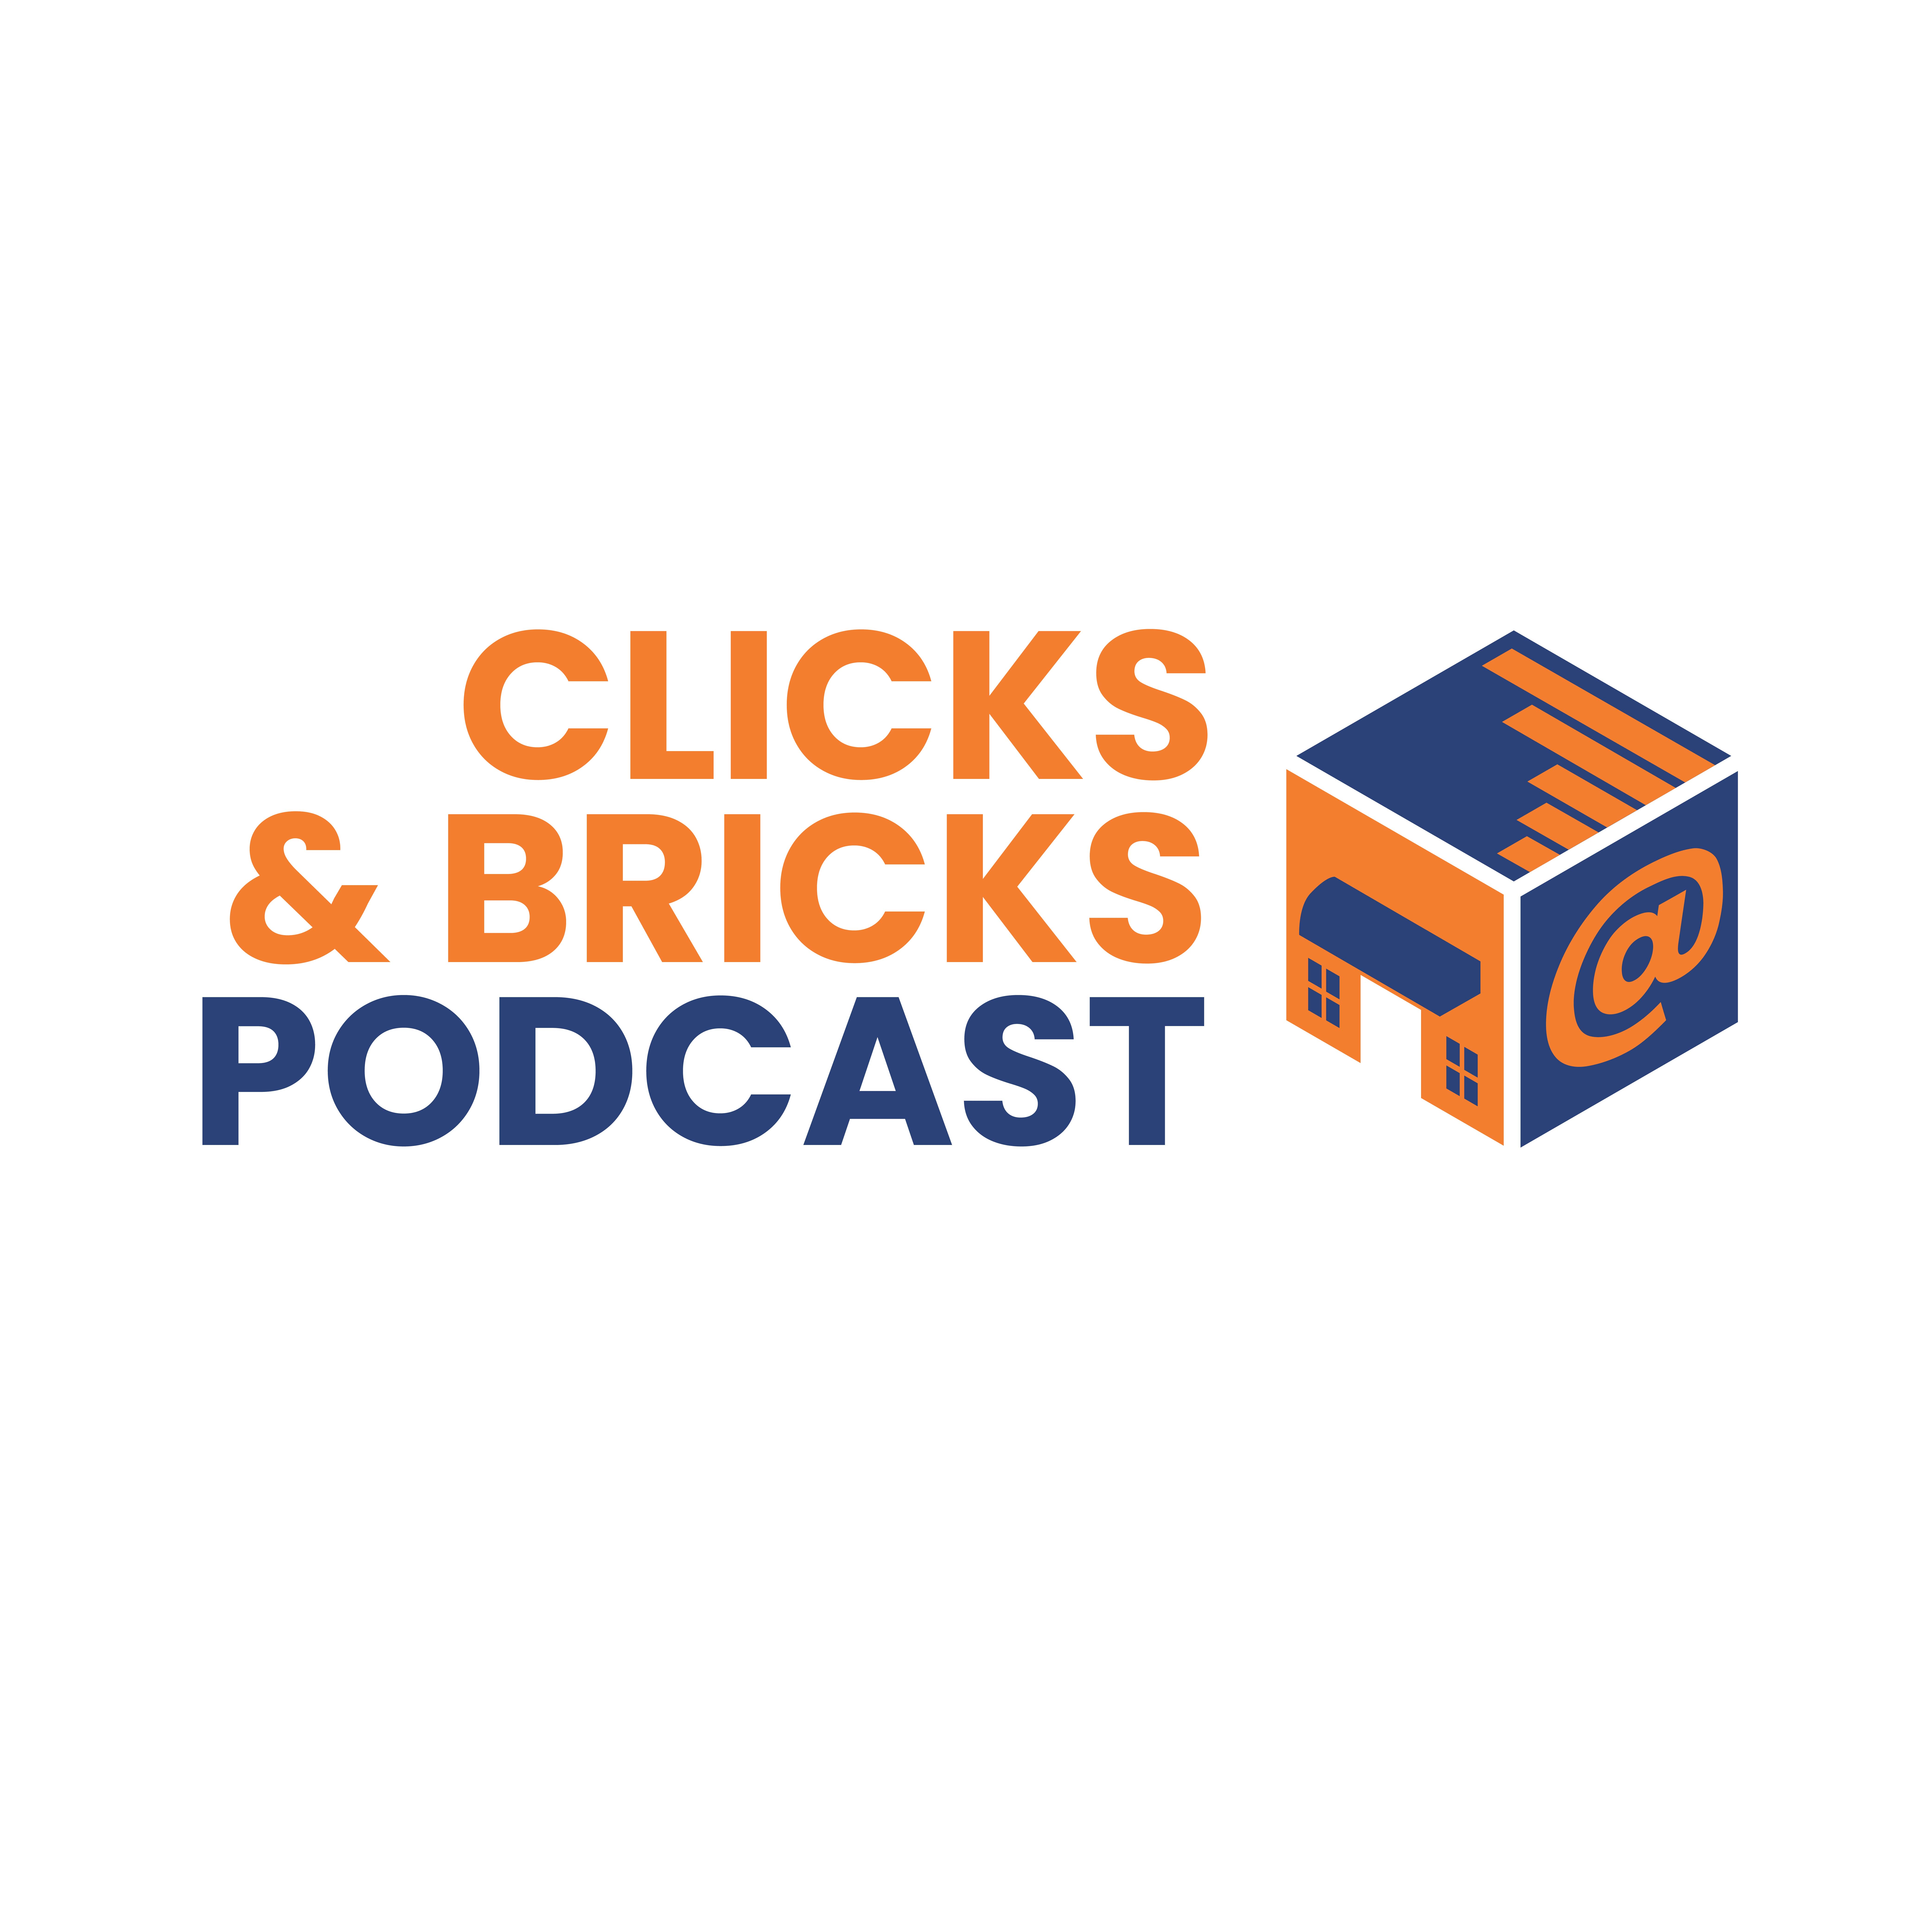 Clicks and Bricks Announces Interview with Debra Crystal from Epigenetic Scan